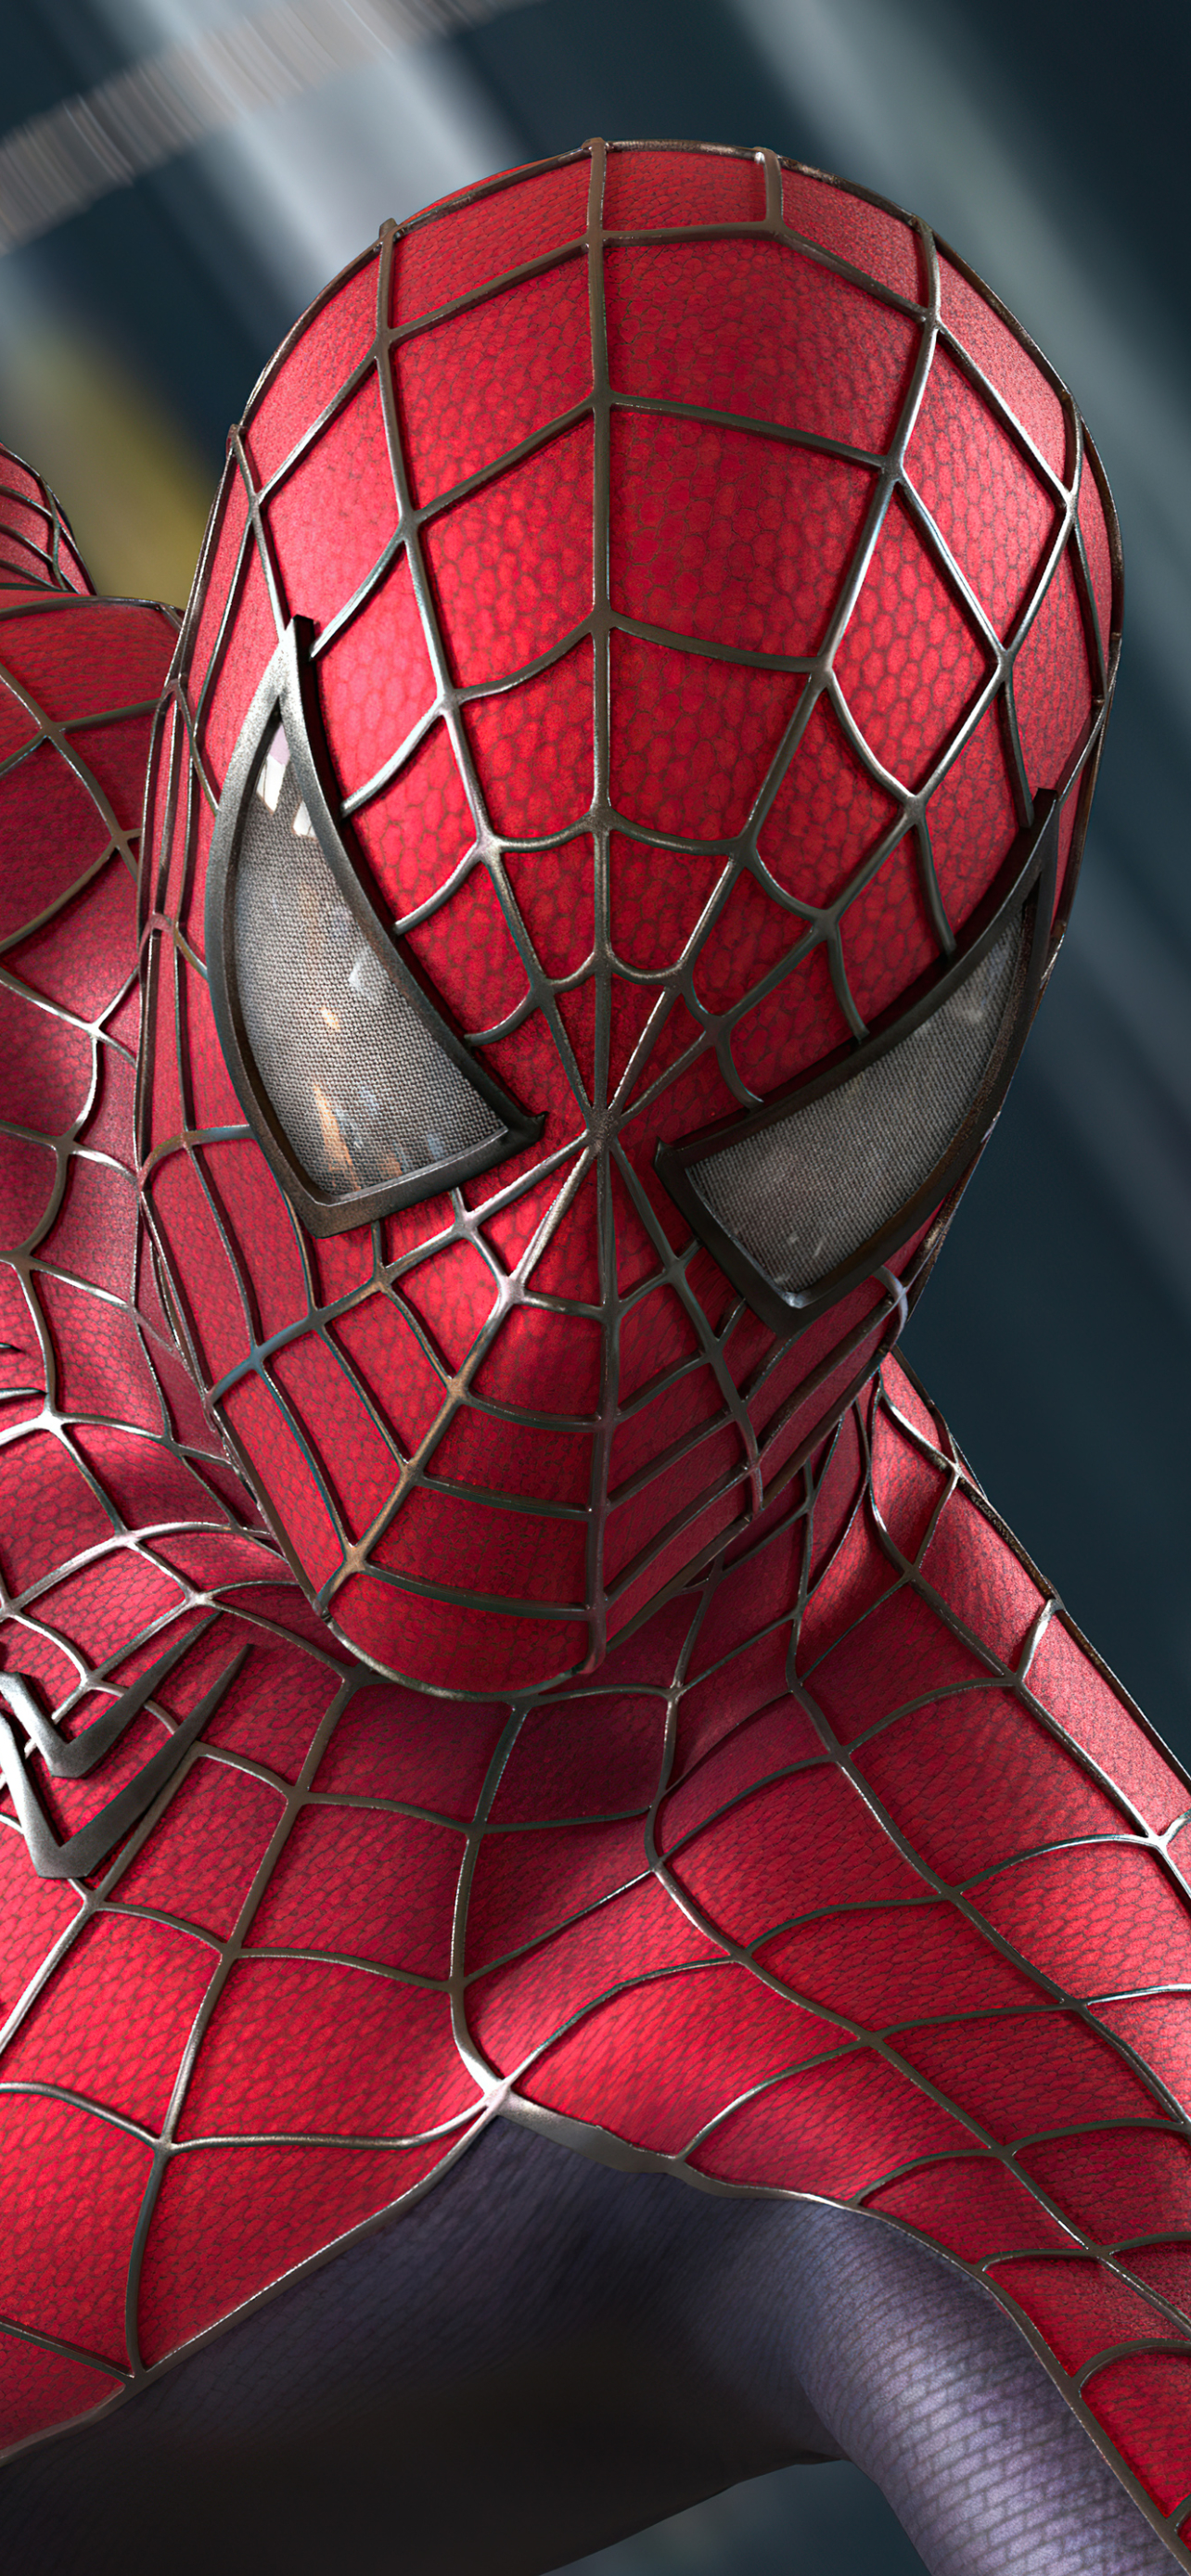 Download Spider Man 2 wallpaper for mobile phone, free Spider Man 2 HD picture